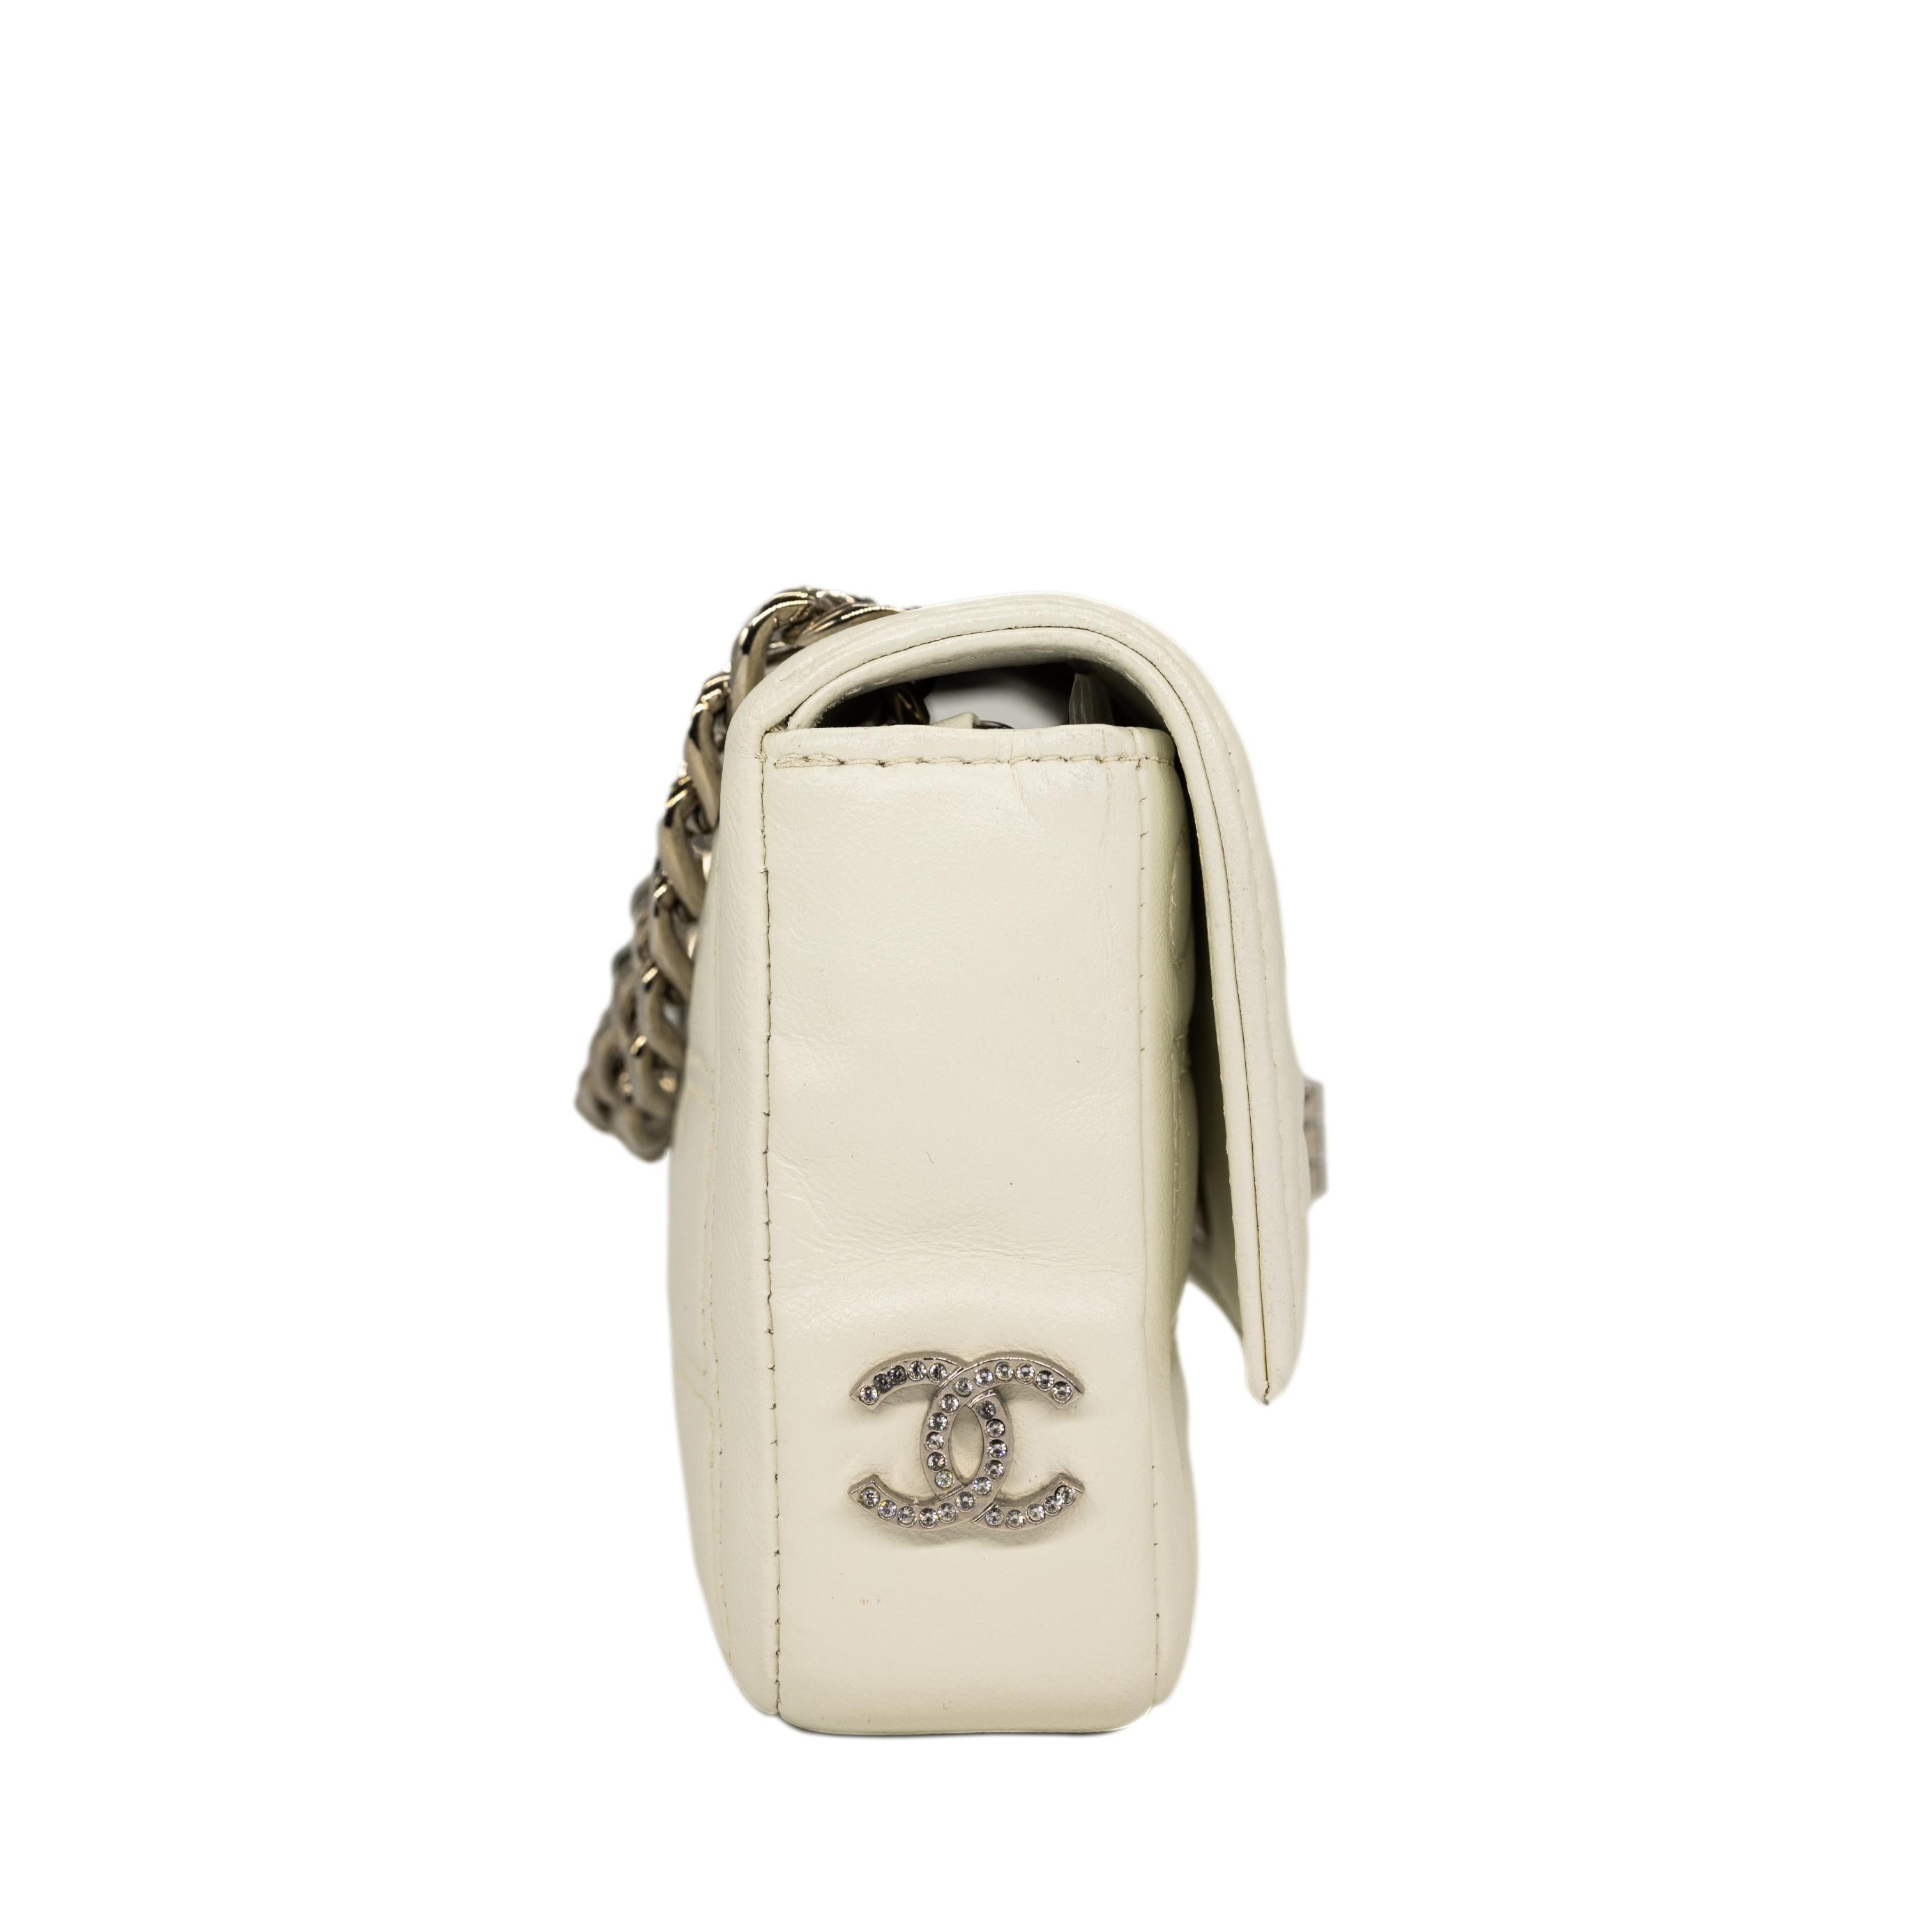 Women's or Men's Chanel Limited Edition 2.55 Re-Issue White Mini Chocolate Bar Shoulder Bag, 2002